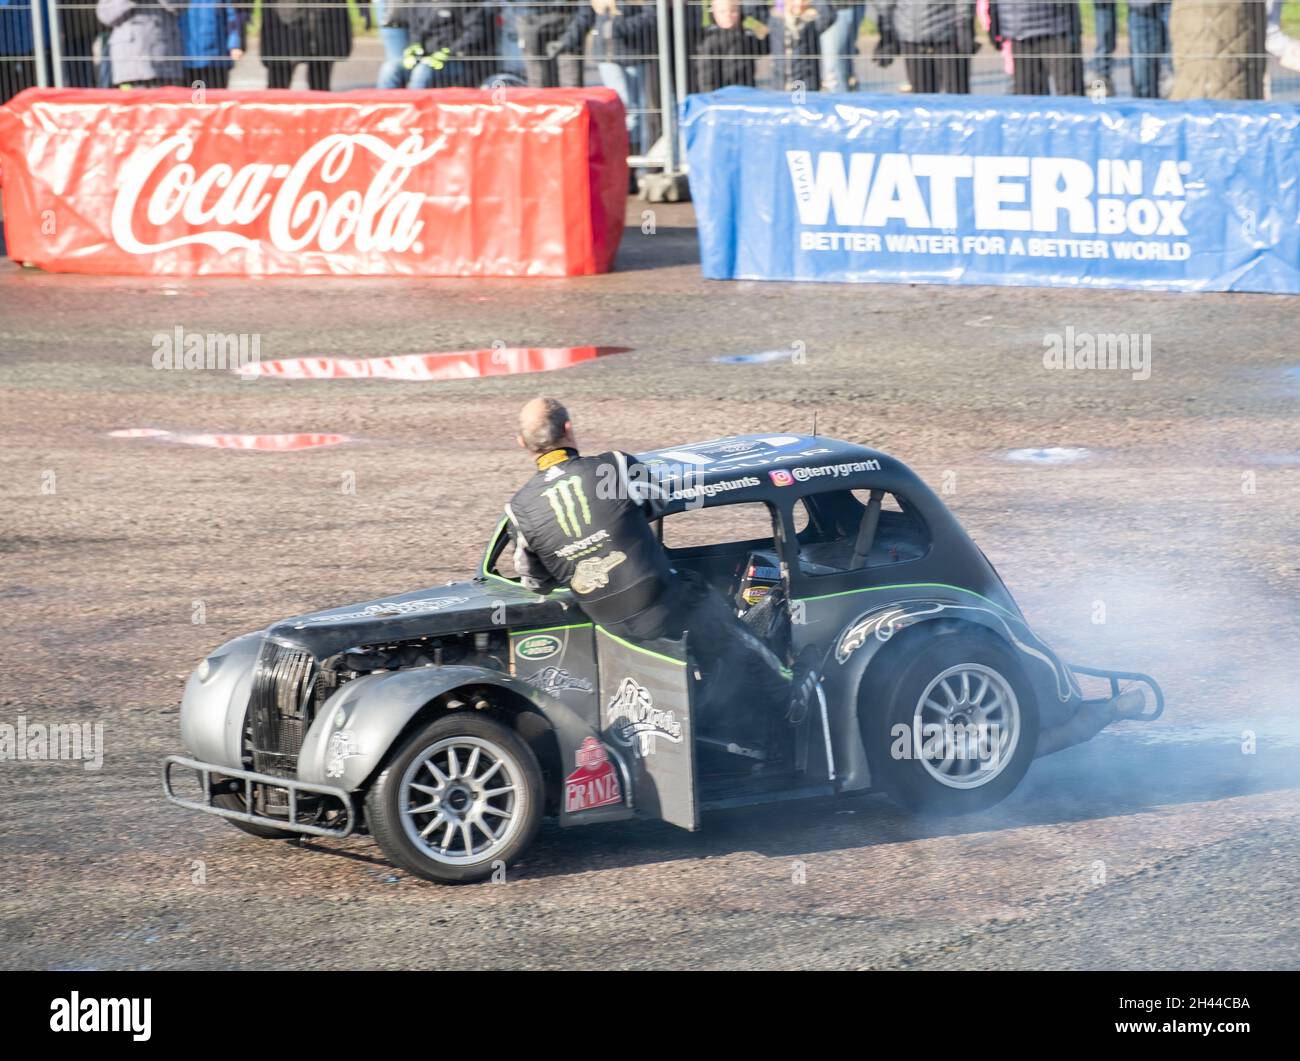 The World famous stunt driver Terry Grant putting on a dangerous stunt show at the Flame & Thunder event at Santa Pod race way, October 2021 Stock Photo